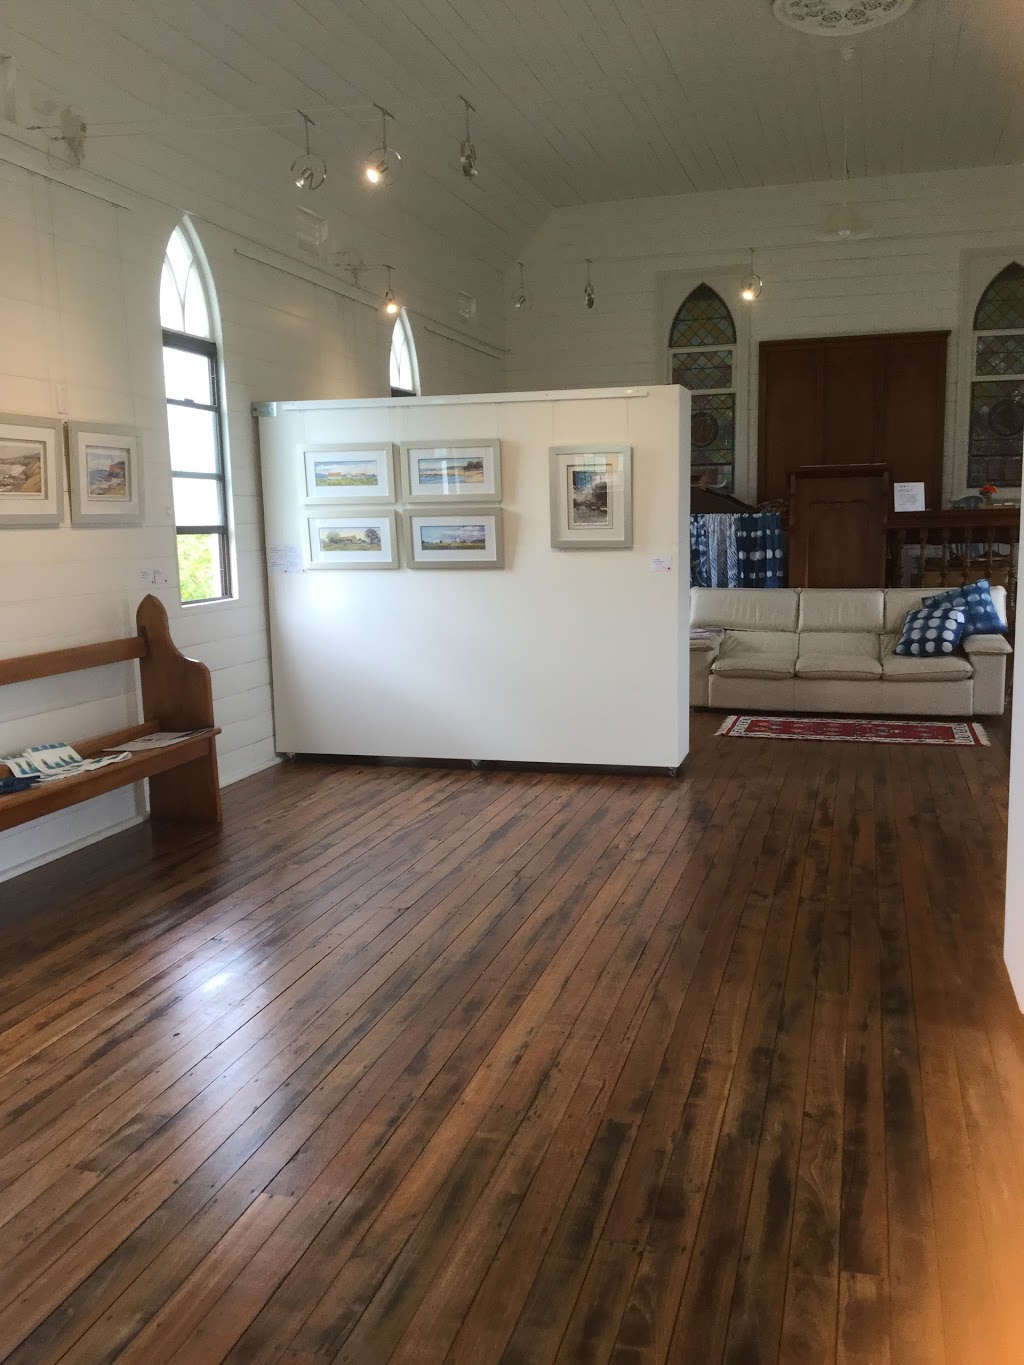 Cowper Art Gallery and Studio | art gallery | 90 Clarence St, Cowper NSW 2460, Australia | 0429357388 OR +61 429 357 388